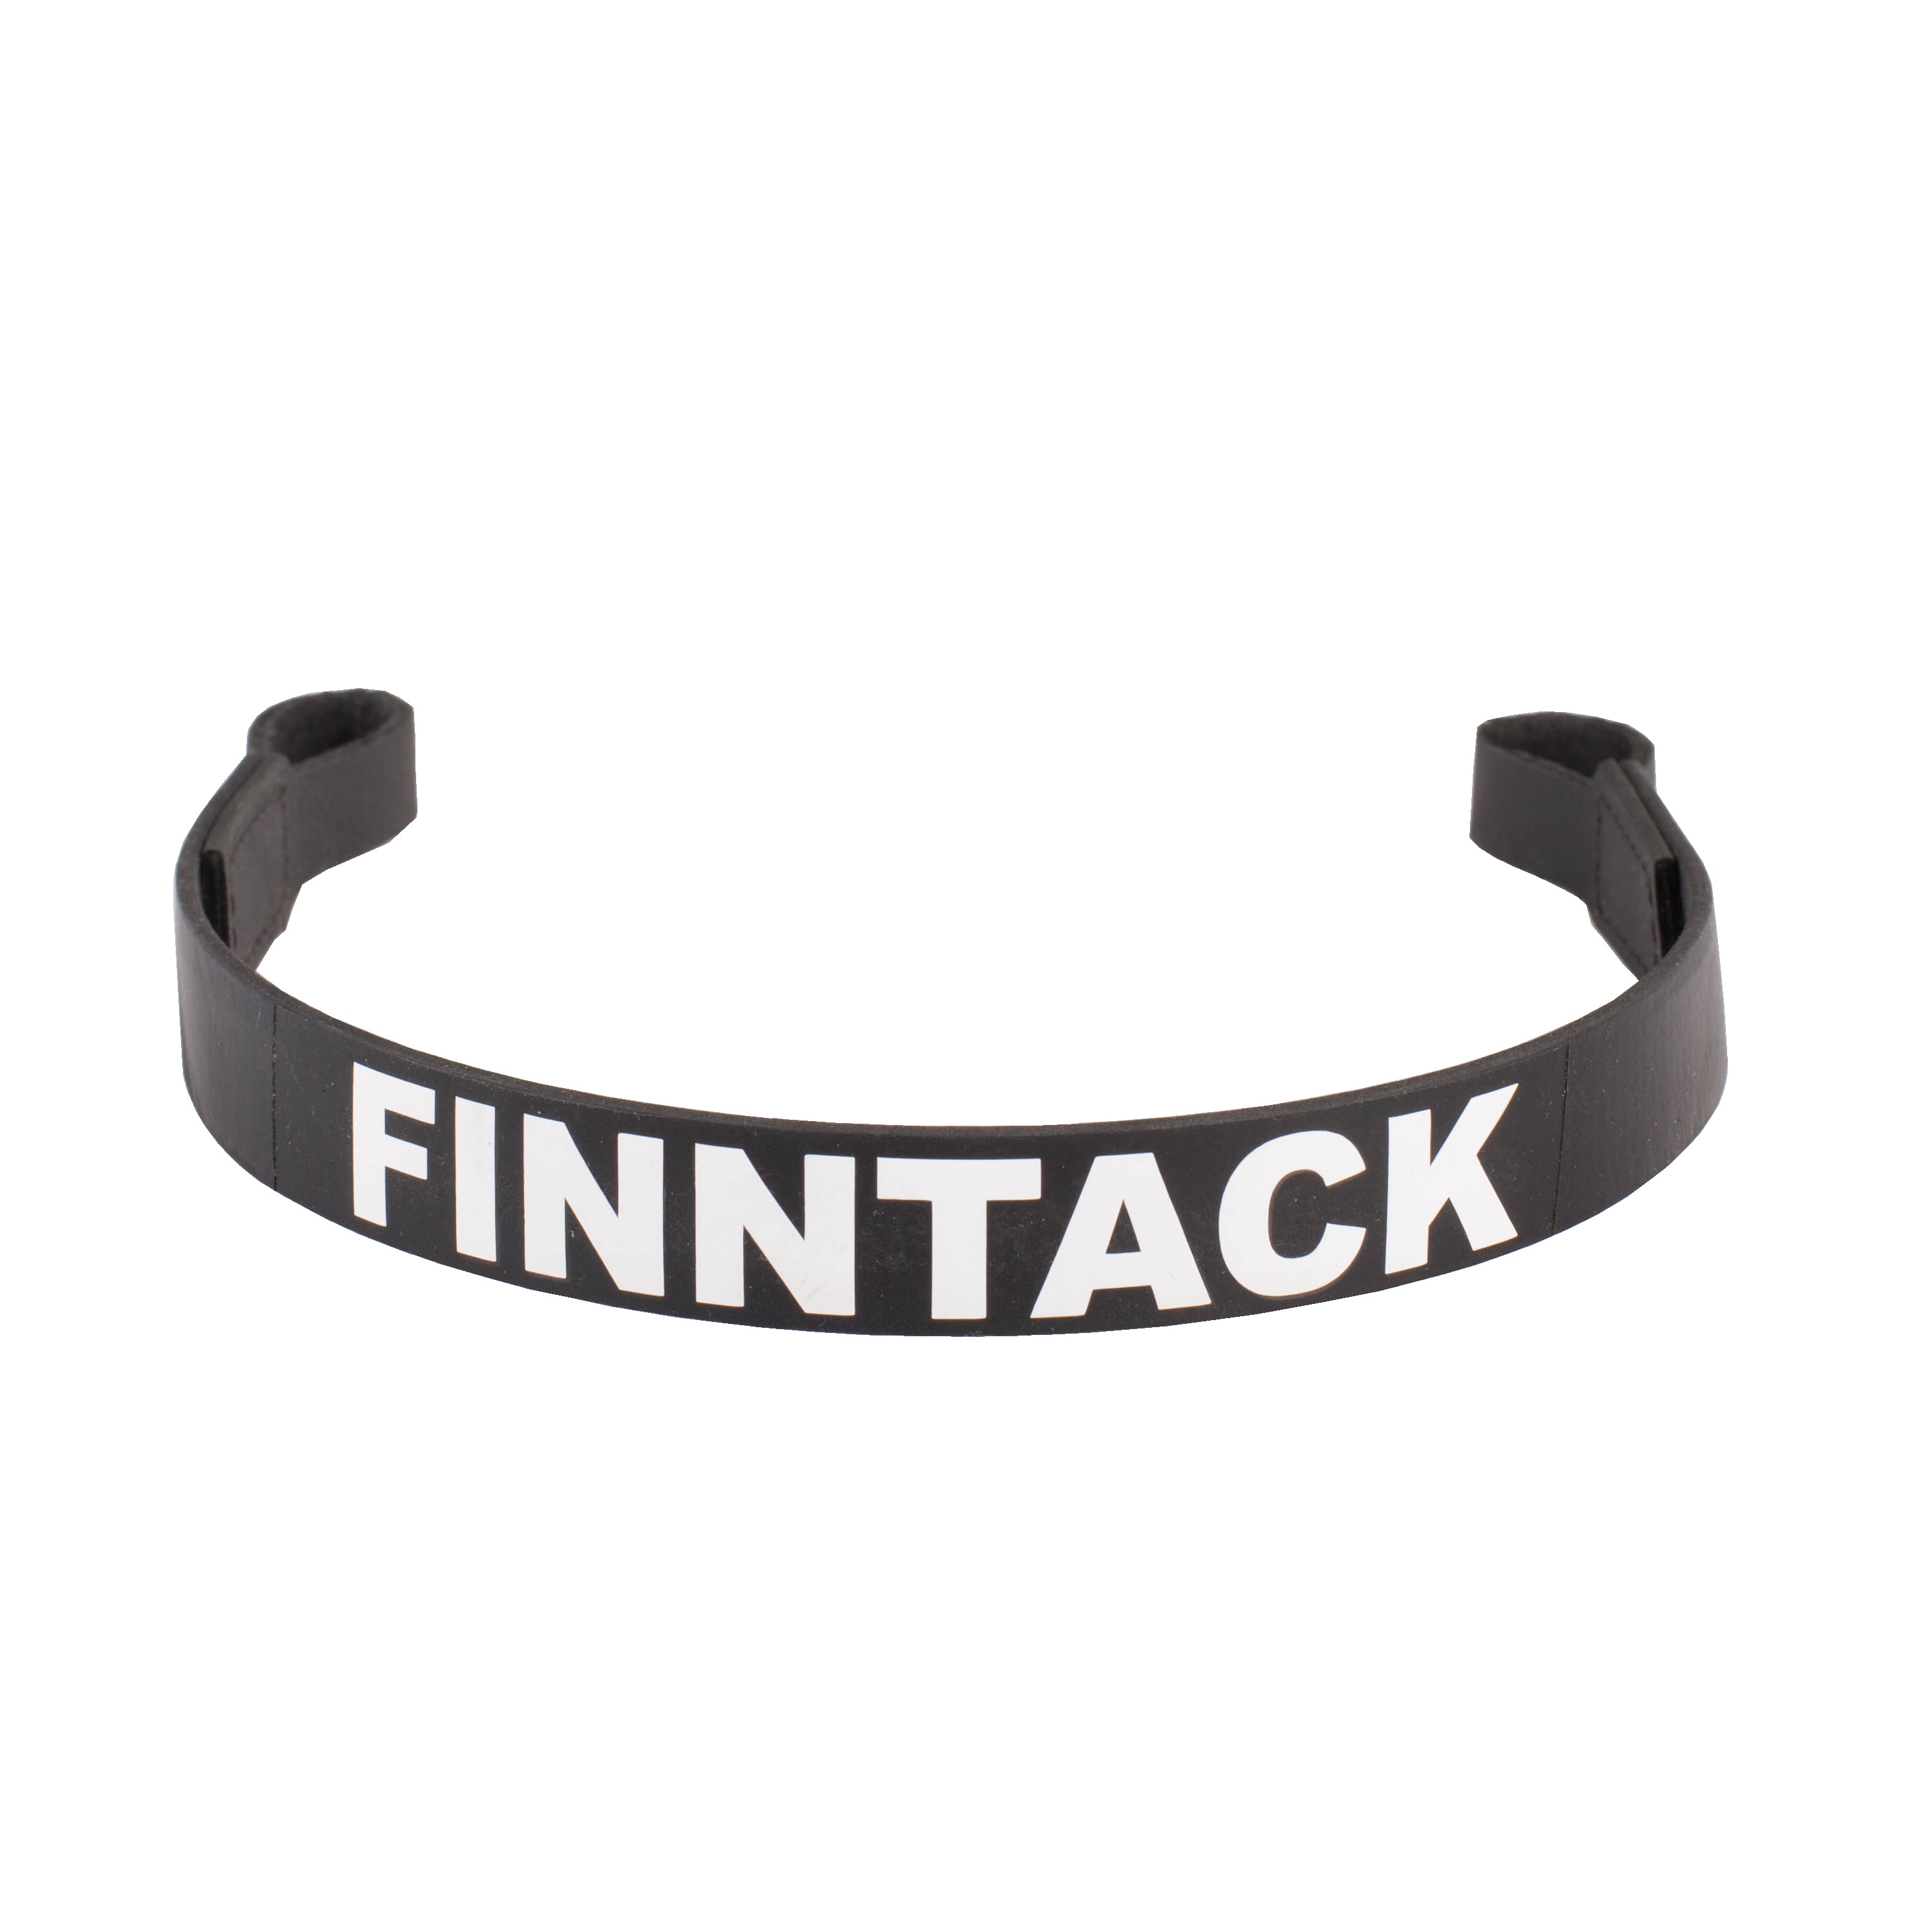 Frontal synthétique, Finntack Pro